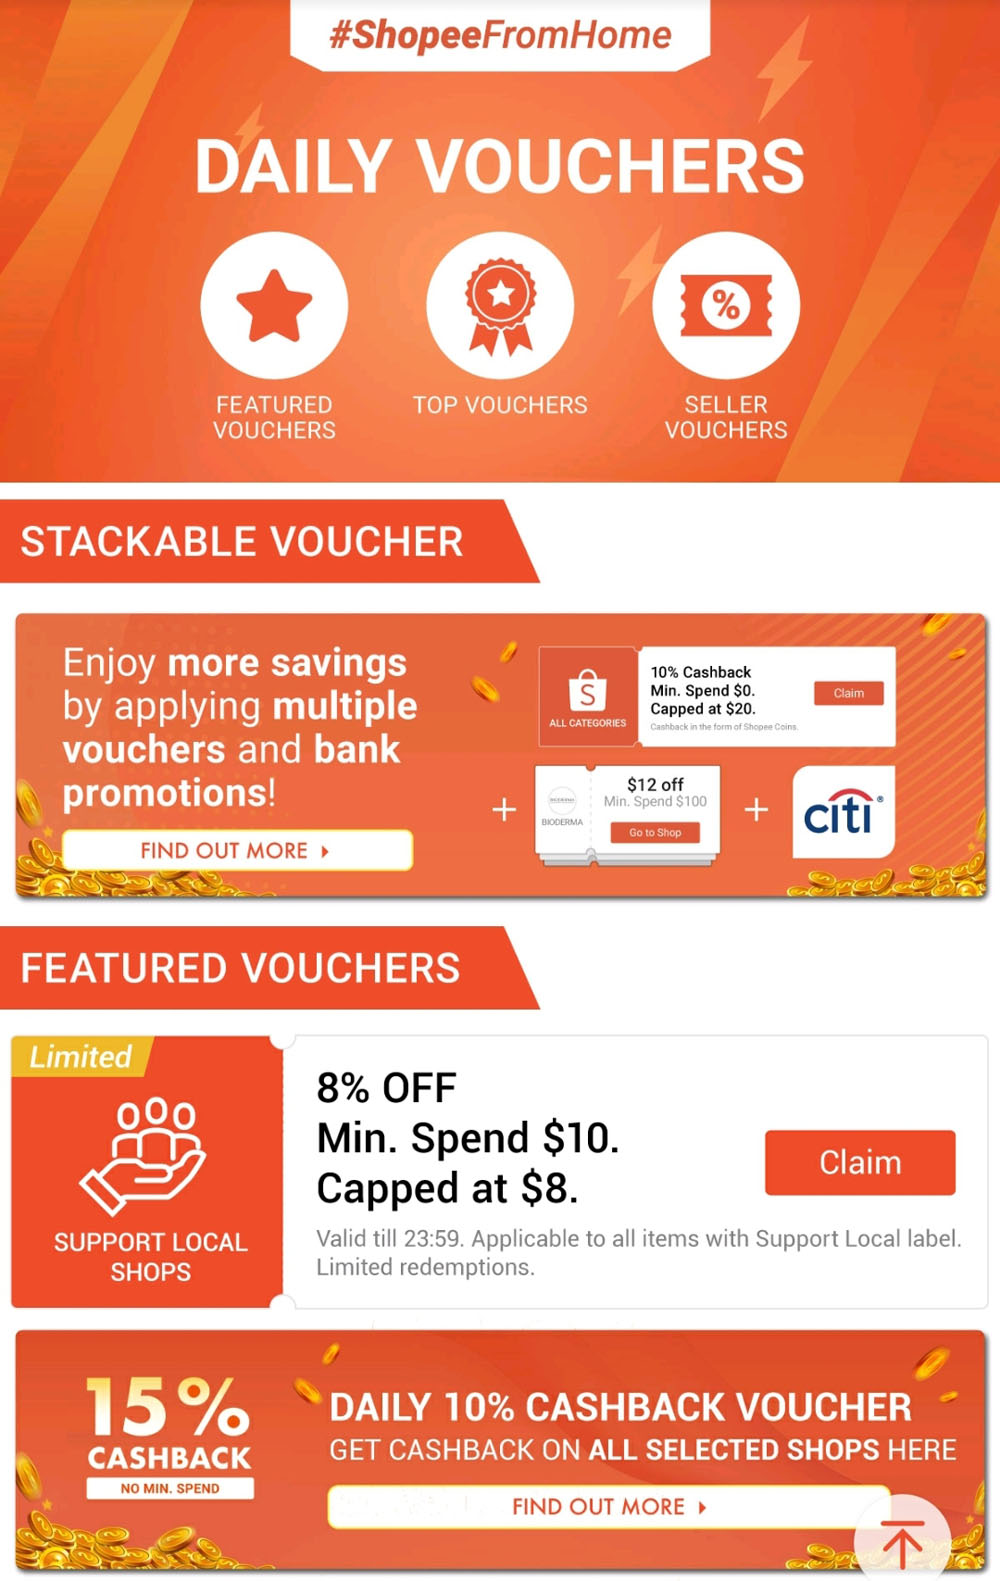 Shopee Promo Code - Get $10 when you sign up as a new user ...